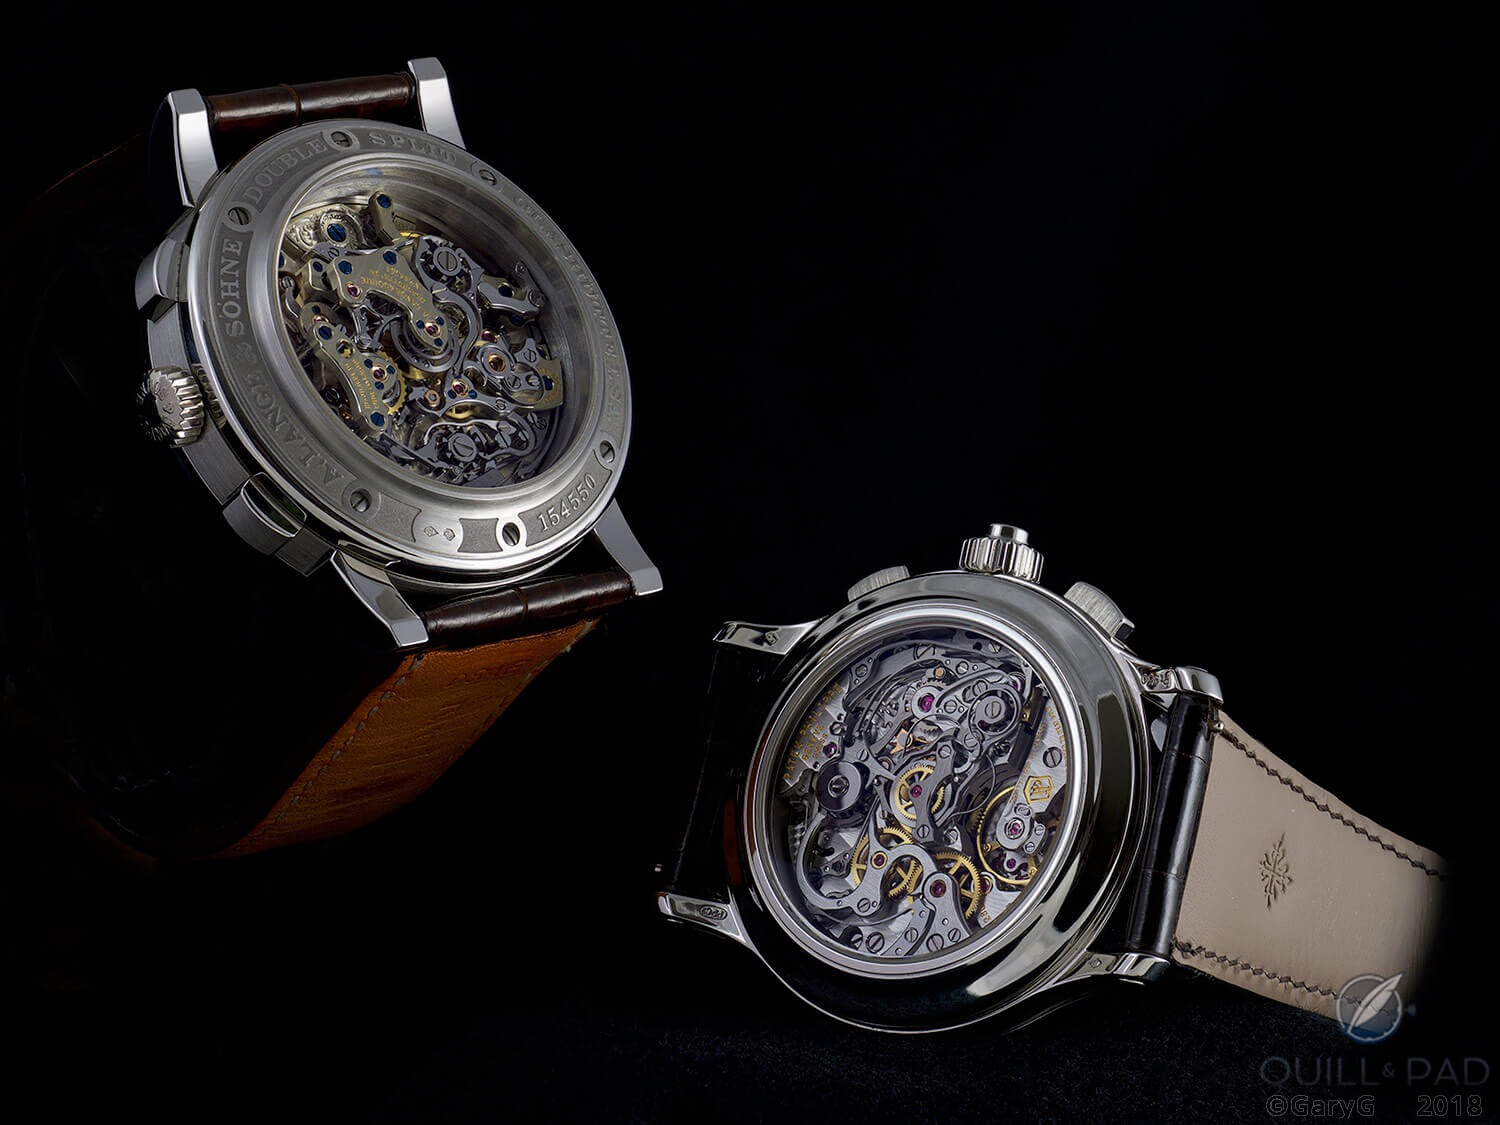 Parting shot: A. Lange & Söhne Double Split and Patek Philippe Reference 5370P